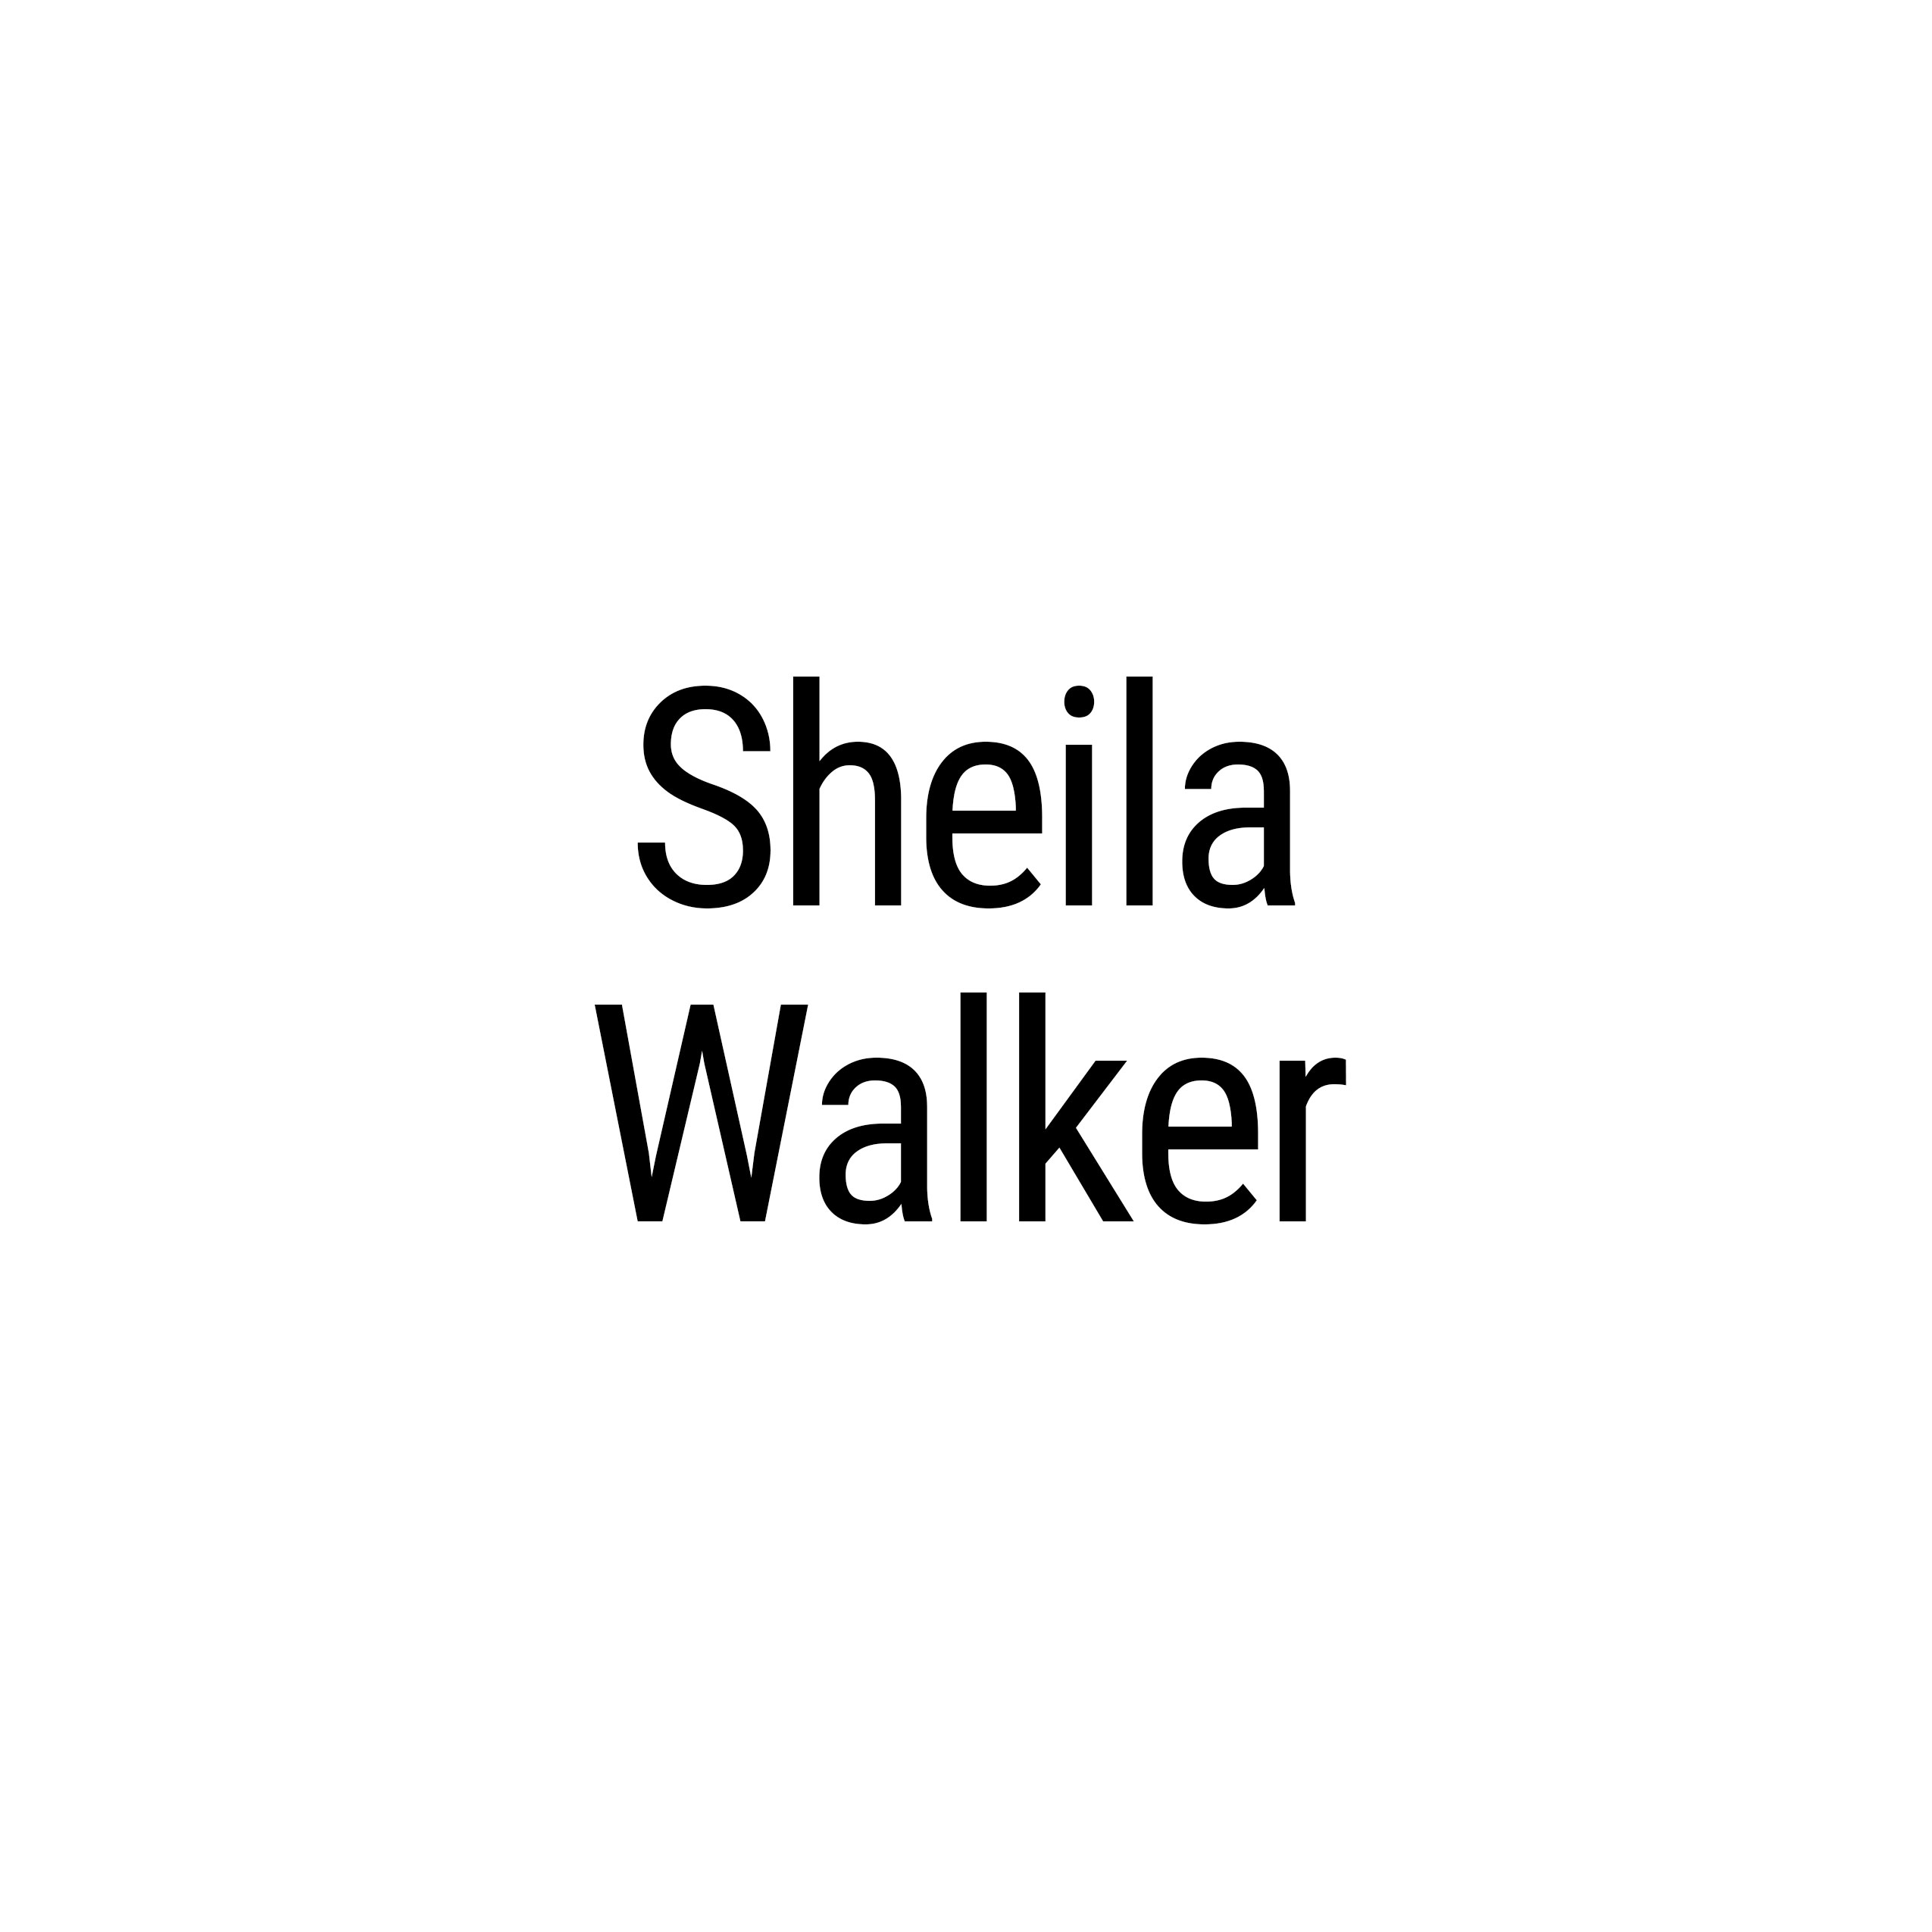 Sheila Walker name in black text on white background